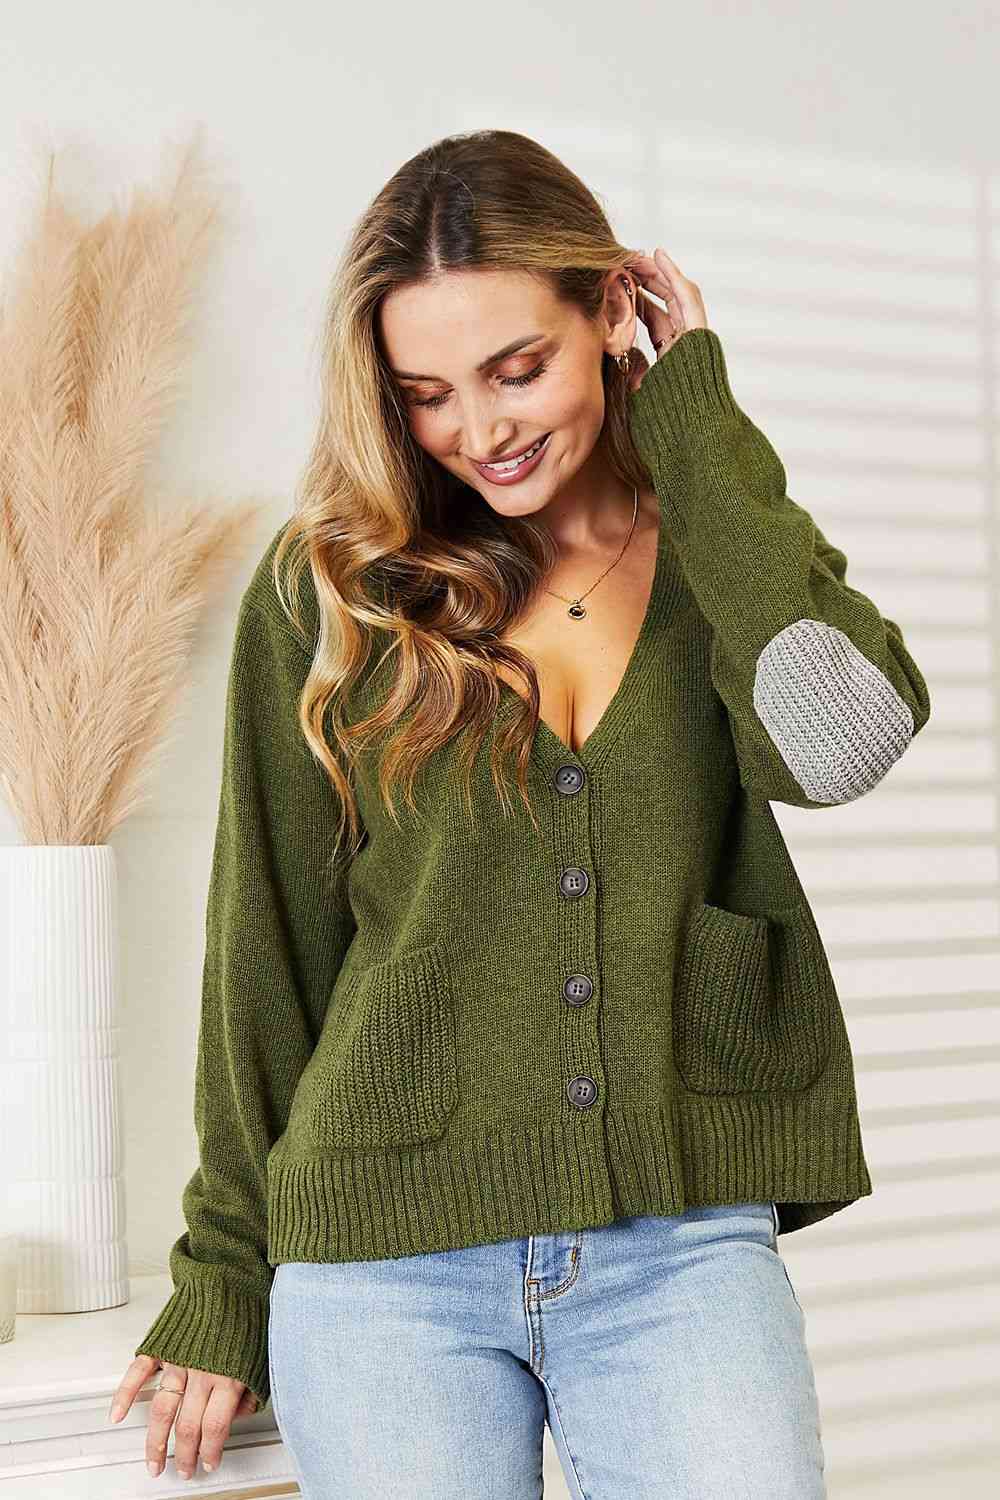 Long Sleeve V Neck Button Down Cardigan - Women’s Clothing & Accessories - Shirts & Tops - 6 - 2024